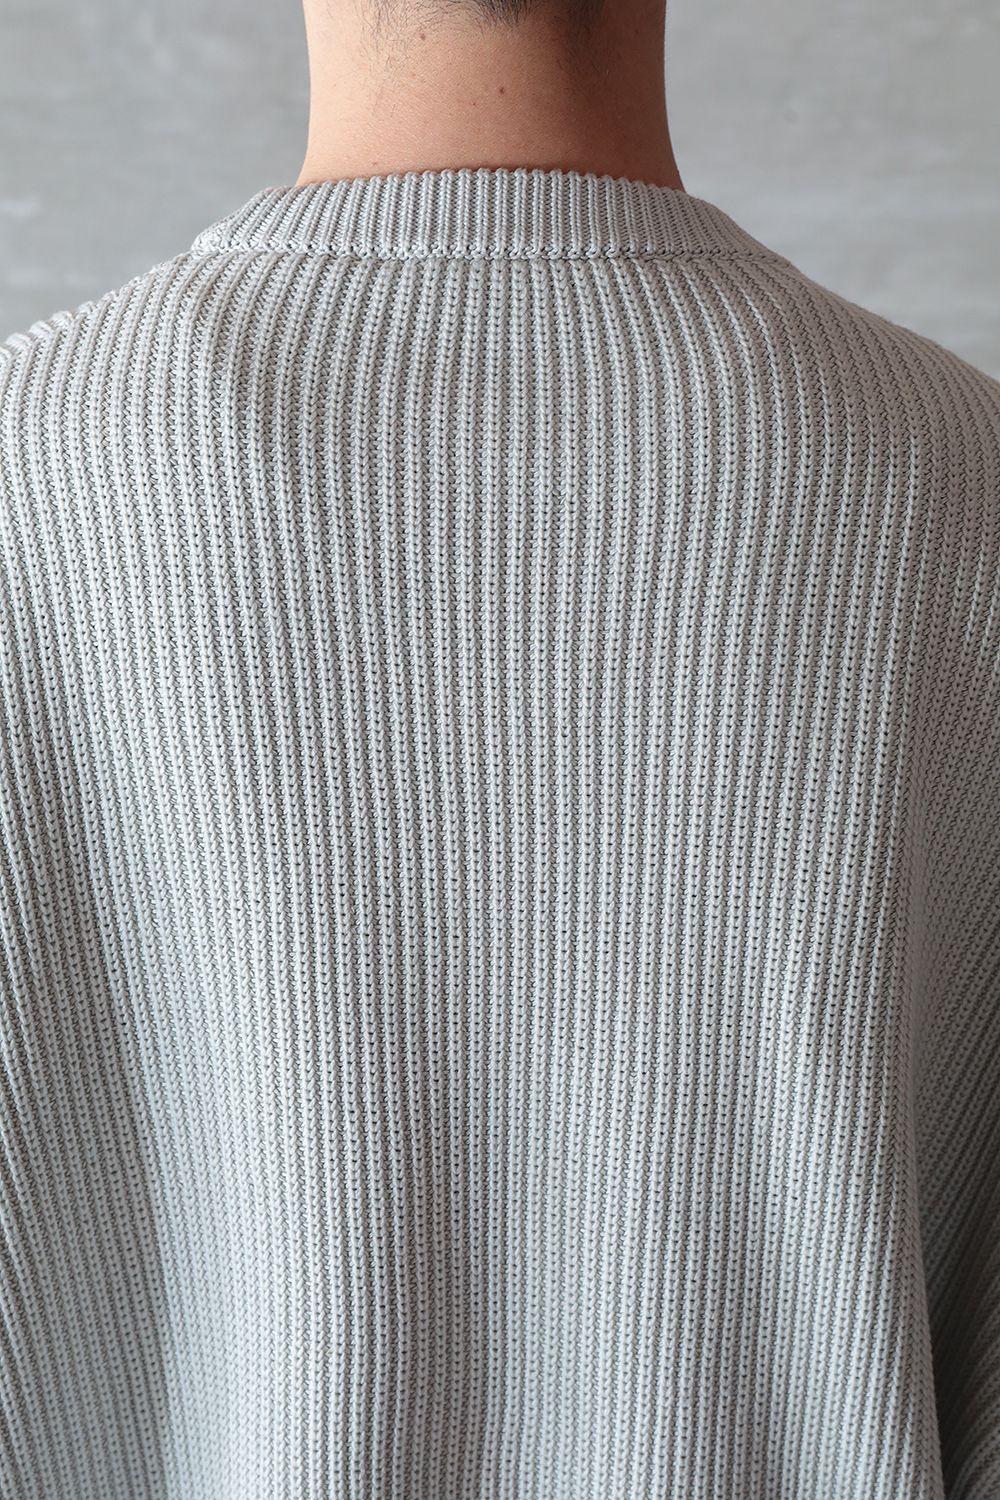 HED MAYNER - 【ラスト1点】TWISTED LONG SLEEVES SWEATER(ALBA GREY